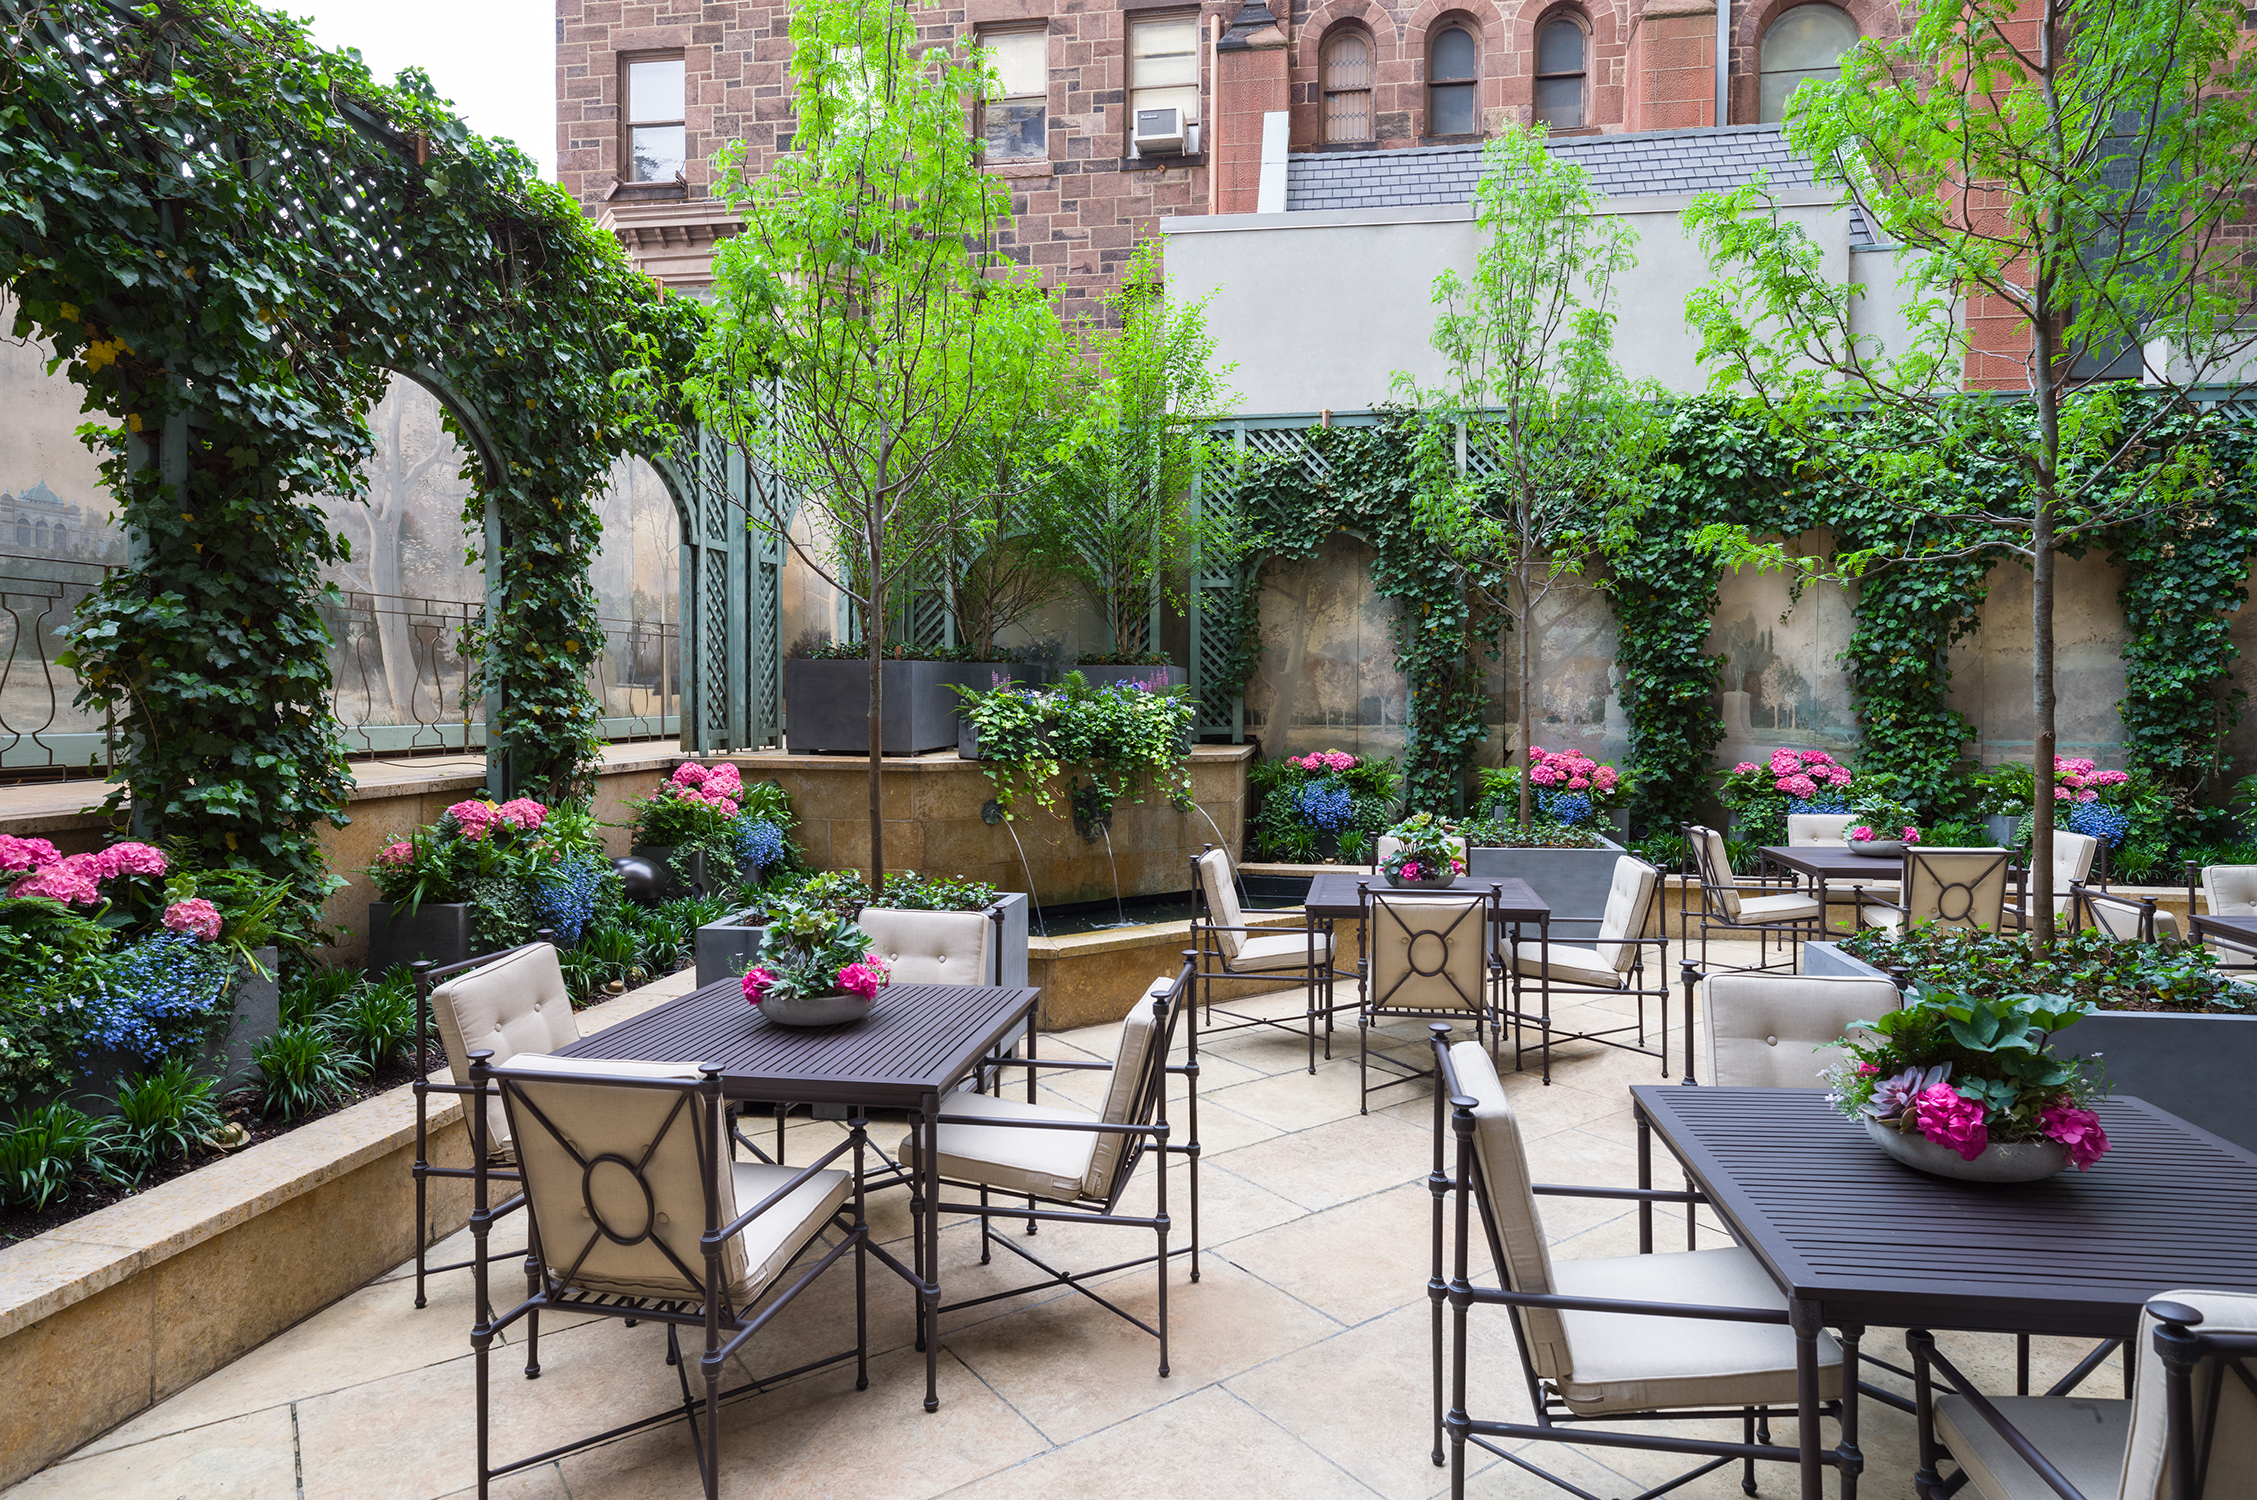 Courtyard at the The Rittenhouse